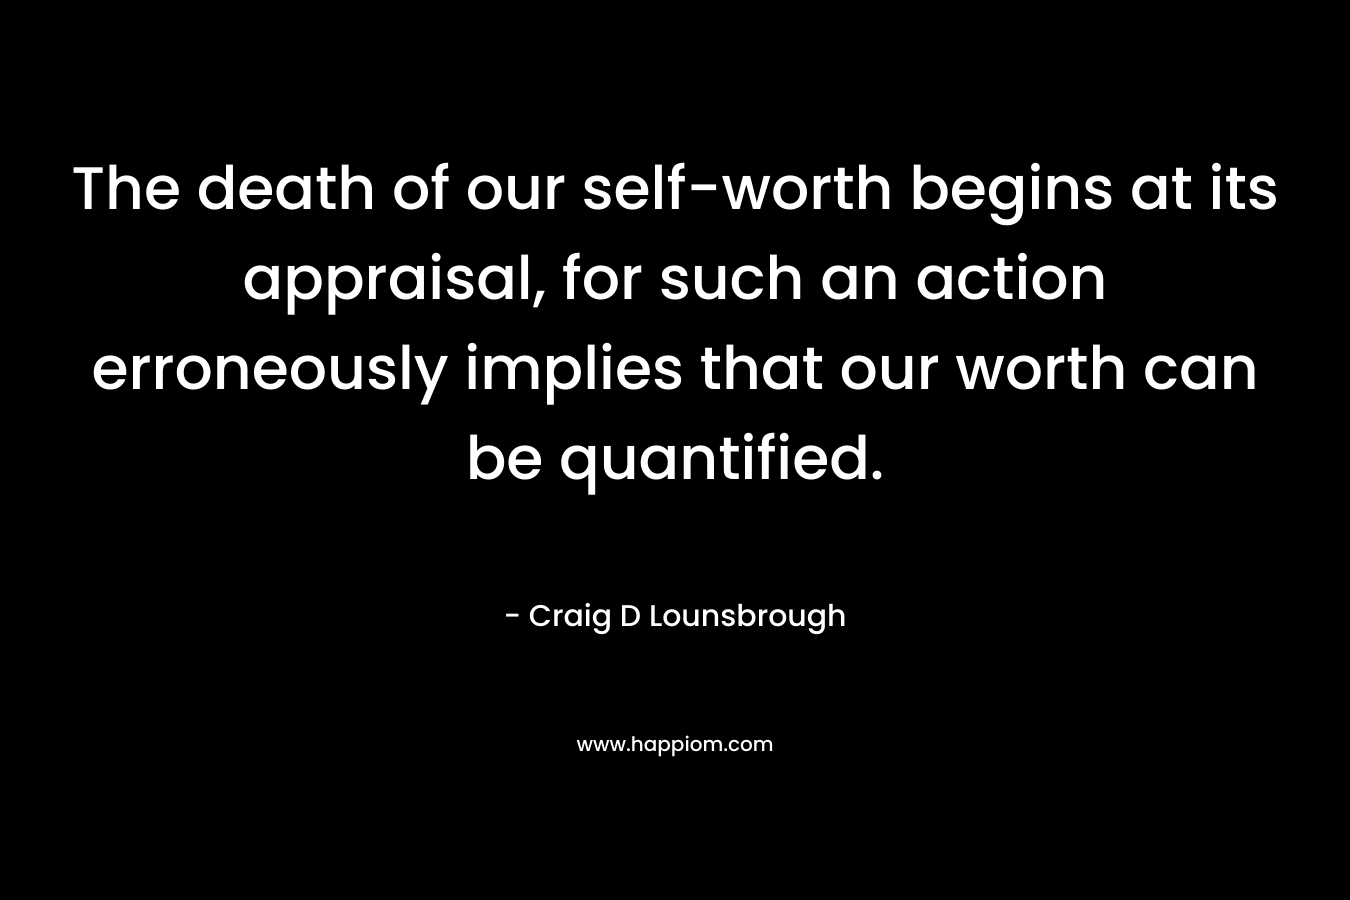 The death of our self-worth begins at its appraisal, for such an action erroneously implies that our worth can be quantified. – Craig D Lounsbrough